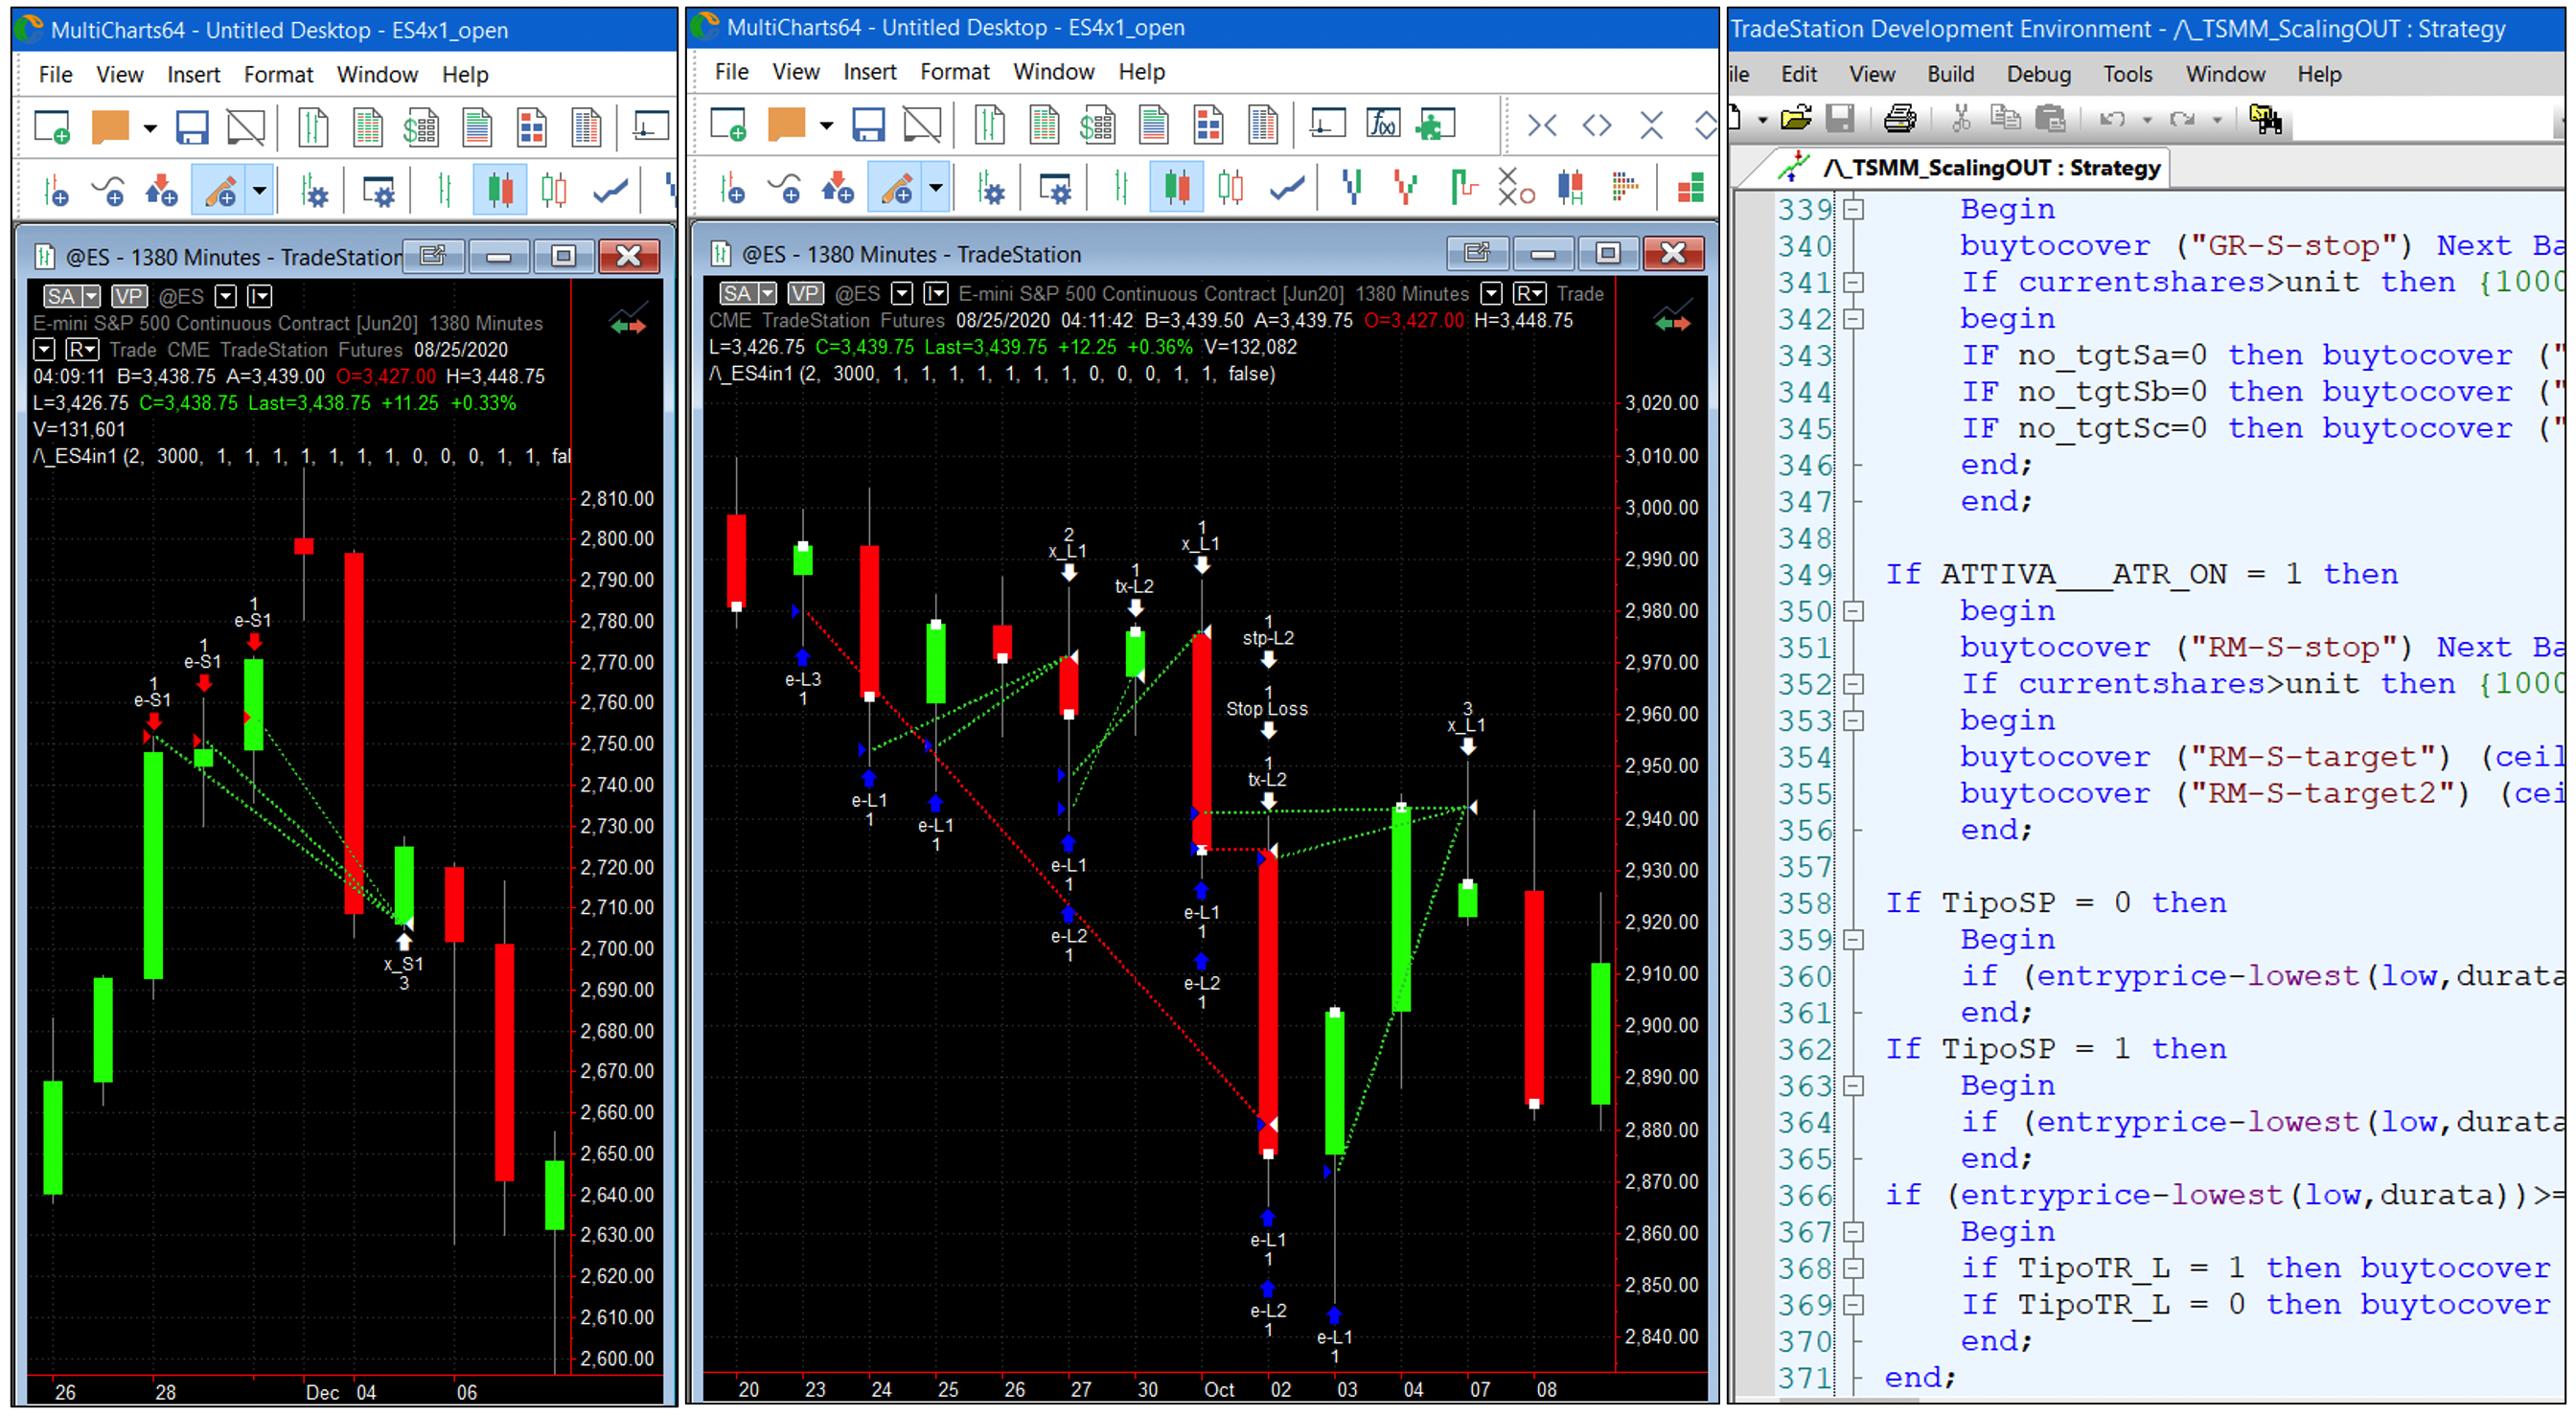 analisicorso money management trading, trading management, position sizing trading, equity control trading